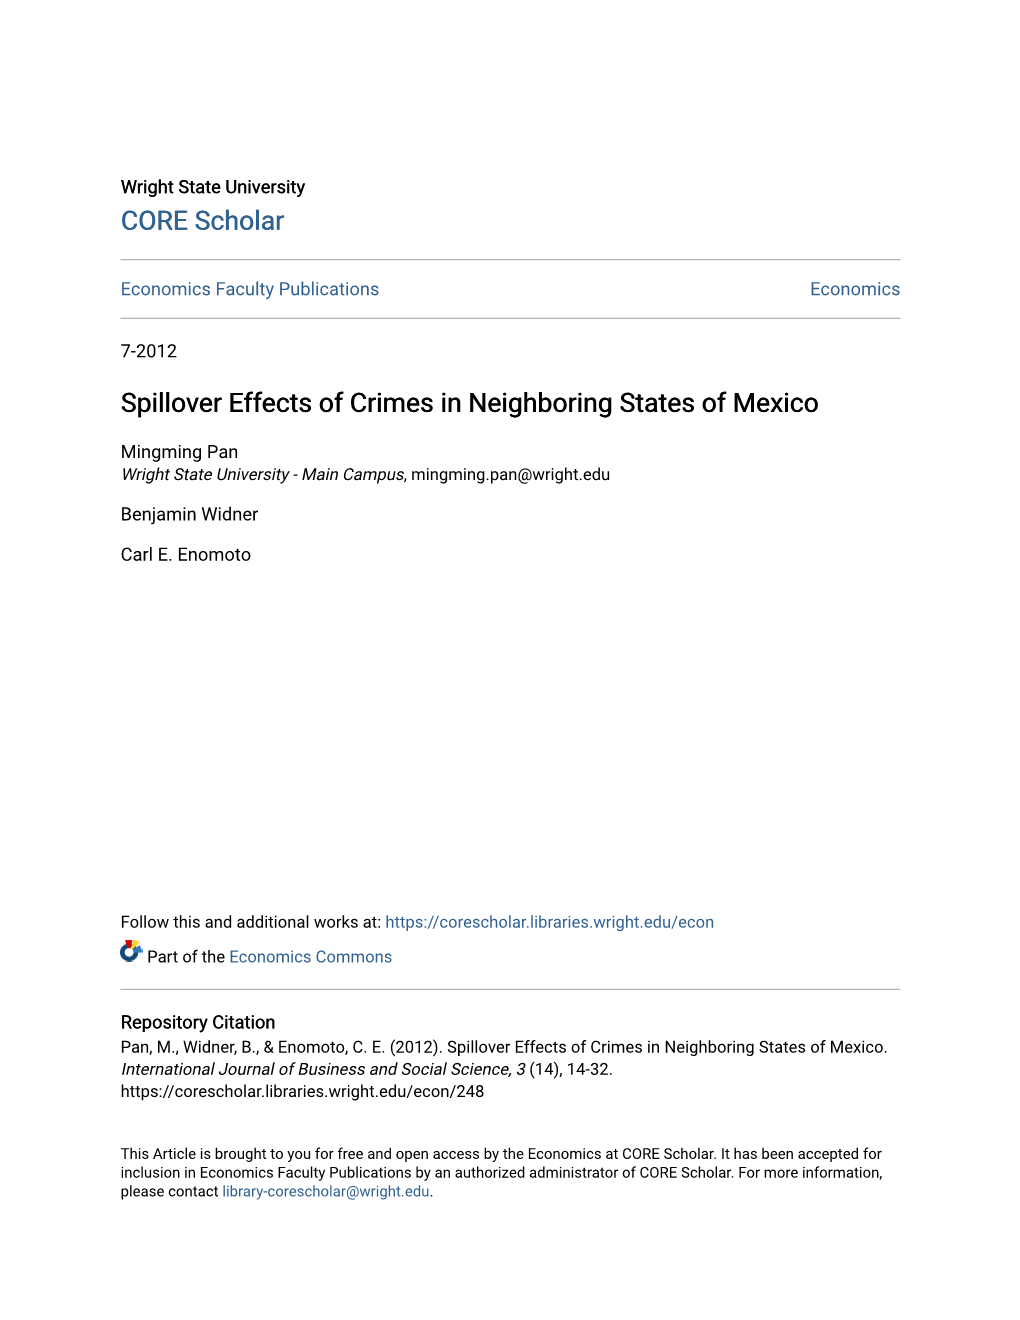 Spillover Effects of Crimes in Neighboring States of Mexico